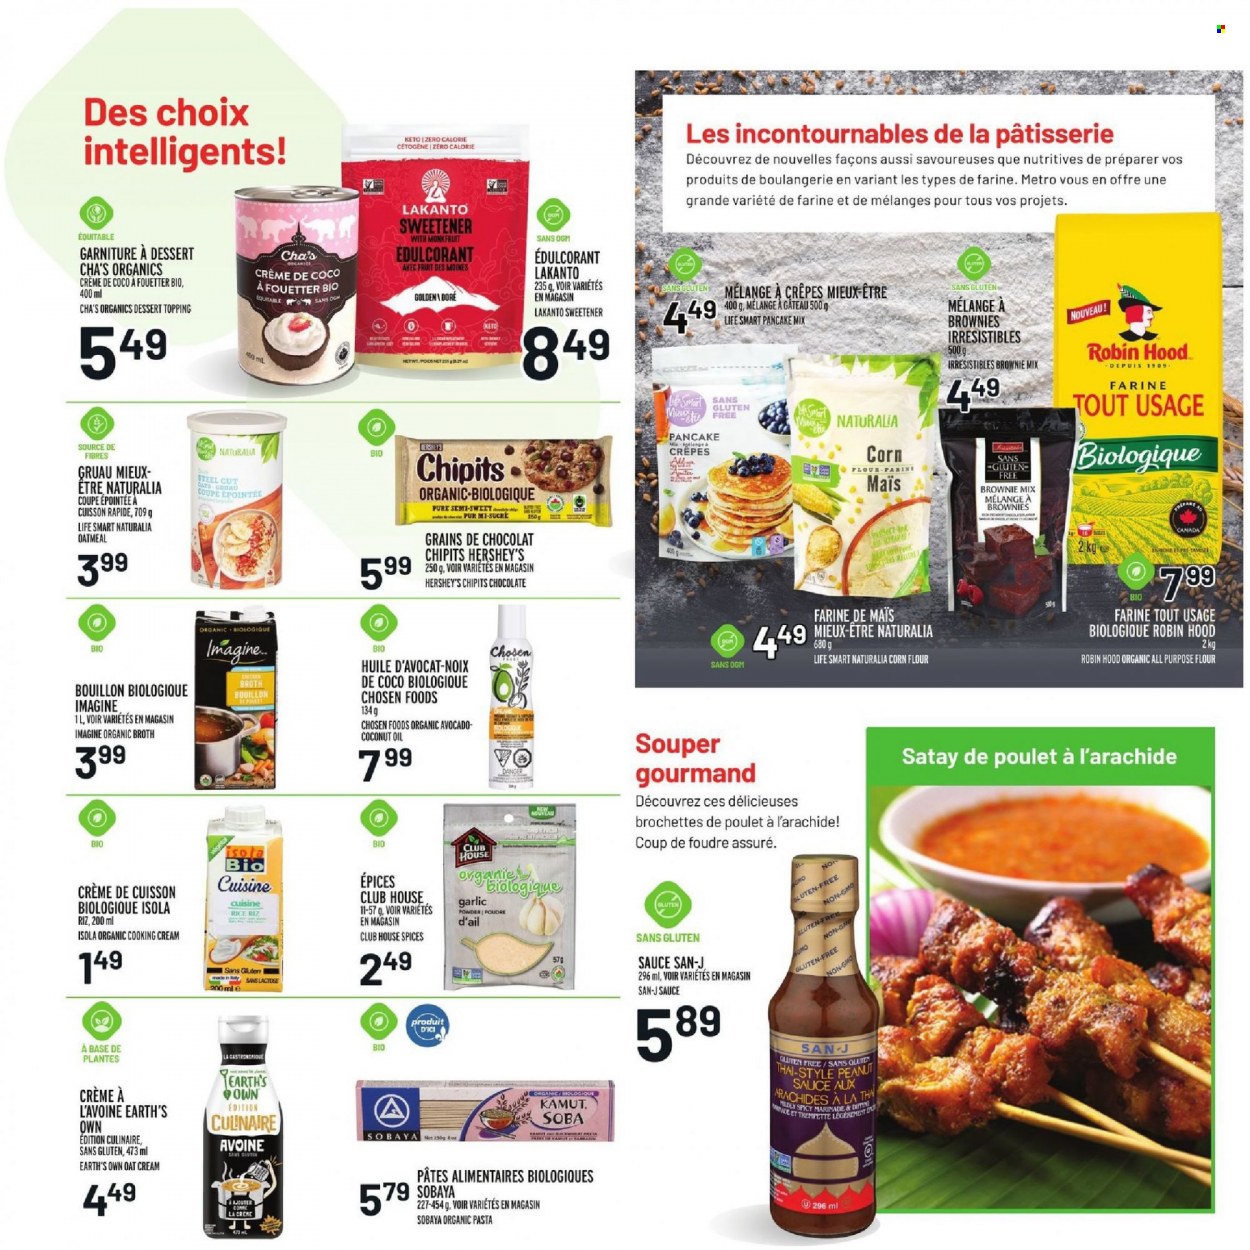 thumbnail - Metro Flyer - October 21, 2021 - October 27, 2021 - Sales products - brownie mix, corn, garlic, avocado, pasta, sauce, pancakes, Hershey's, chocolate, all purpose flour, bouillon, flour, oatmeal, oats, corn flour, topping, broth, sweetener, rice, marinade, coconut oil, oil. Page 3.